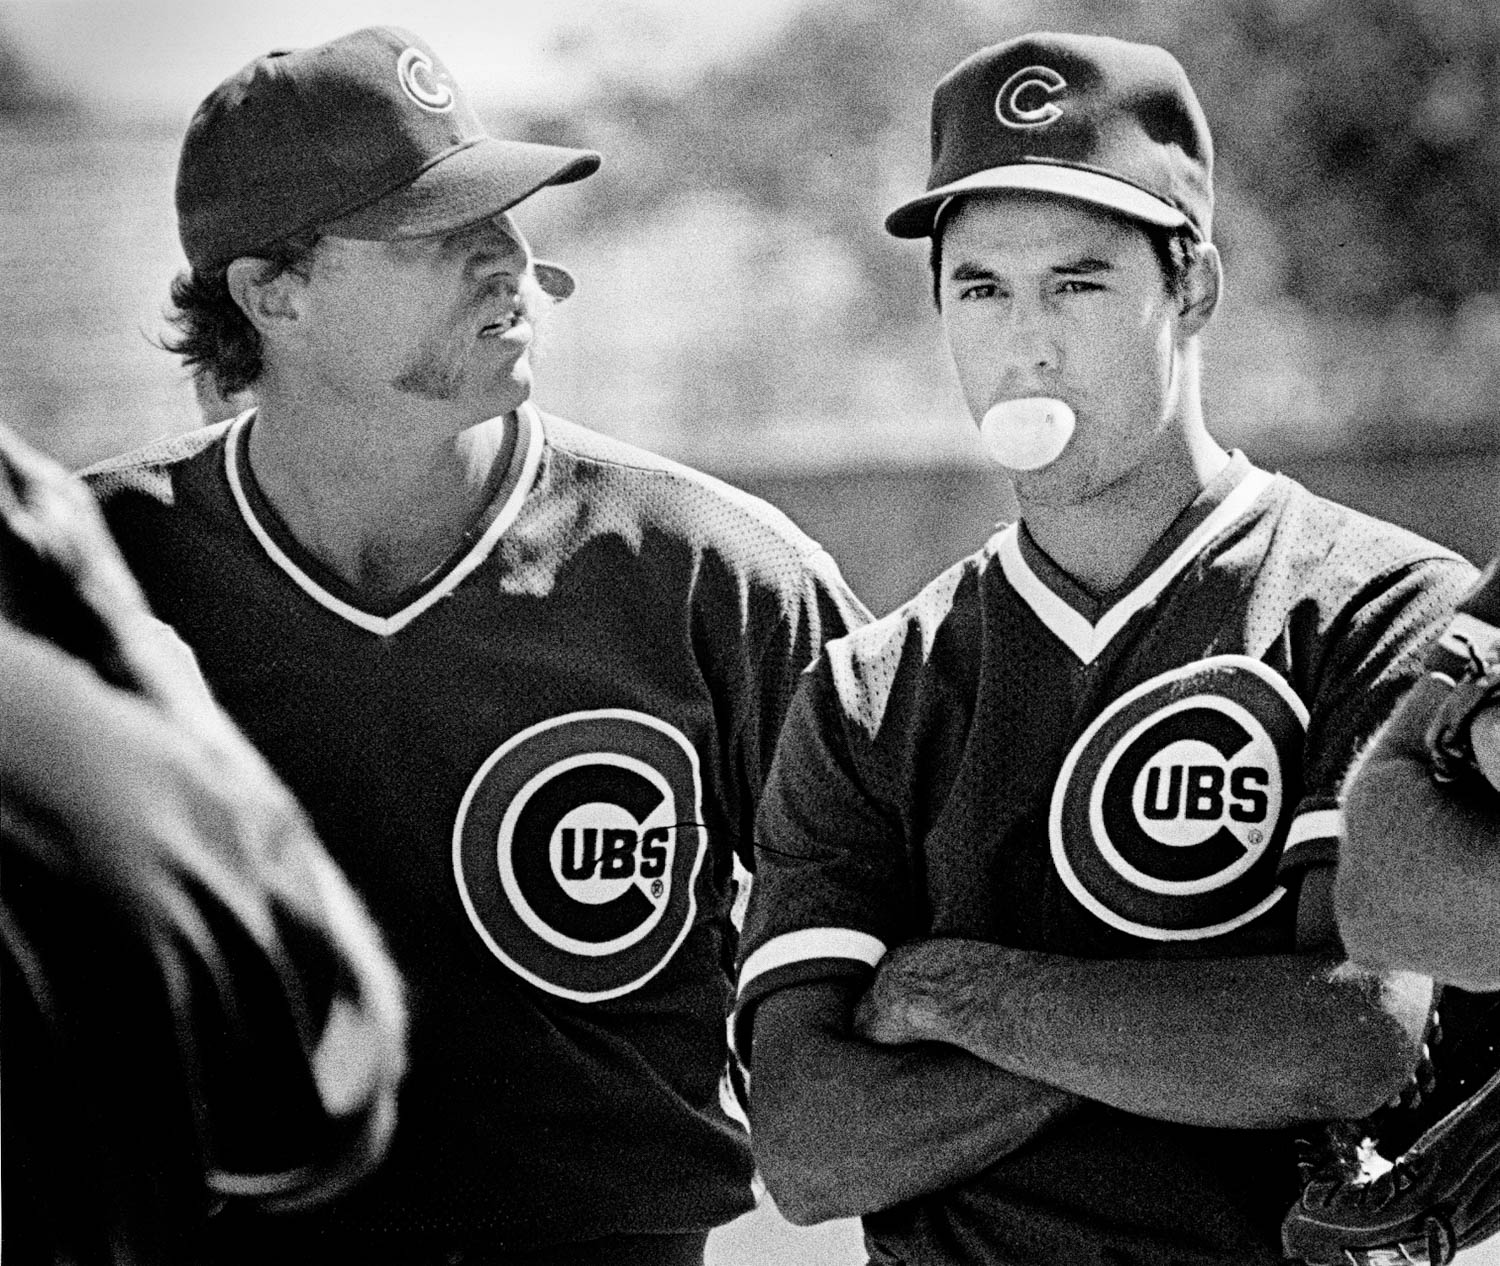 Future Hall of Famers - Veteran Cubs pitcher Goose Gossage reacts quizzically to third-year starter Greg Maddux blowing a bubble during a spring training workout in Mesa, Az. Both pitchers have since been inducted into the Baseball Hall of Fame. Gossage was inducted in 2008 and Maddux in 2014. (Todd Mizener)